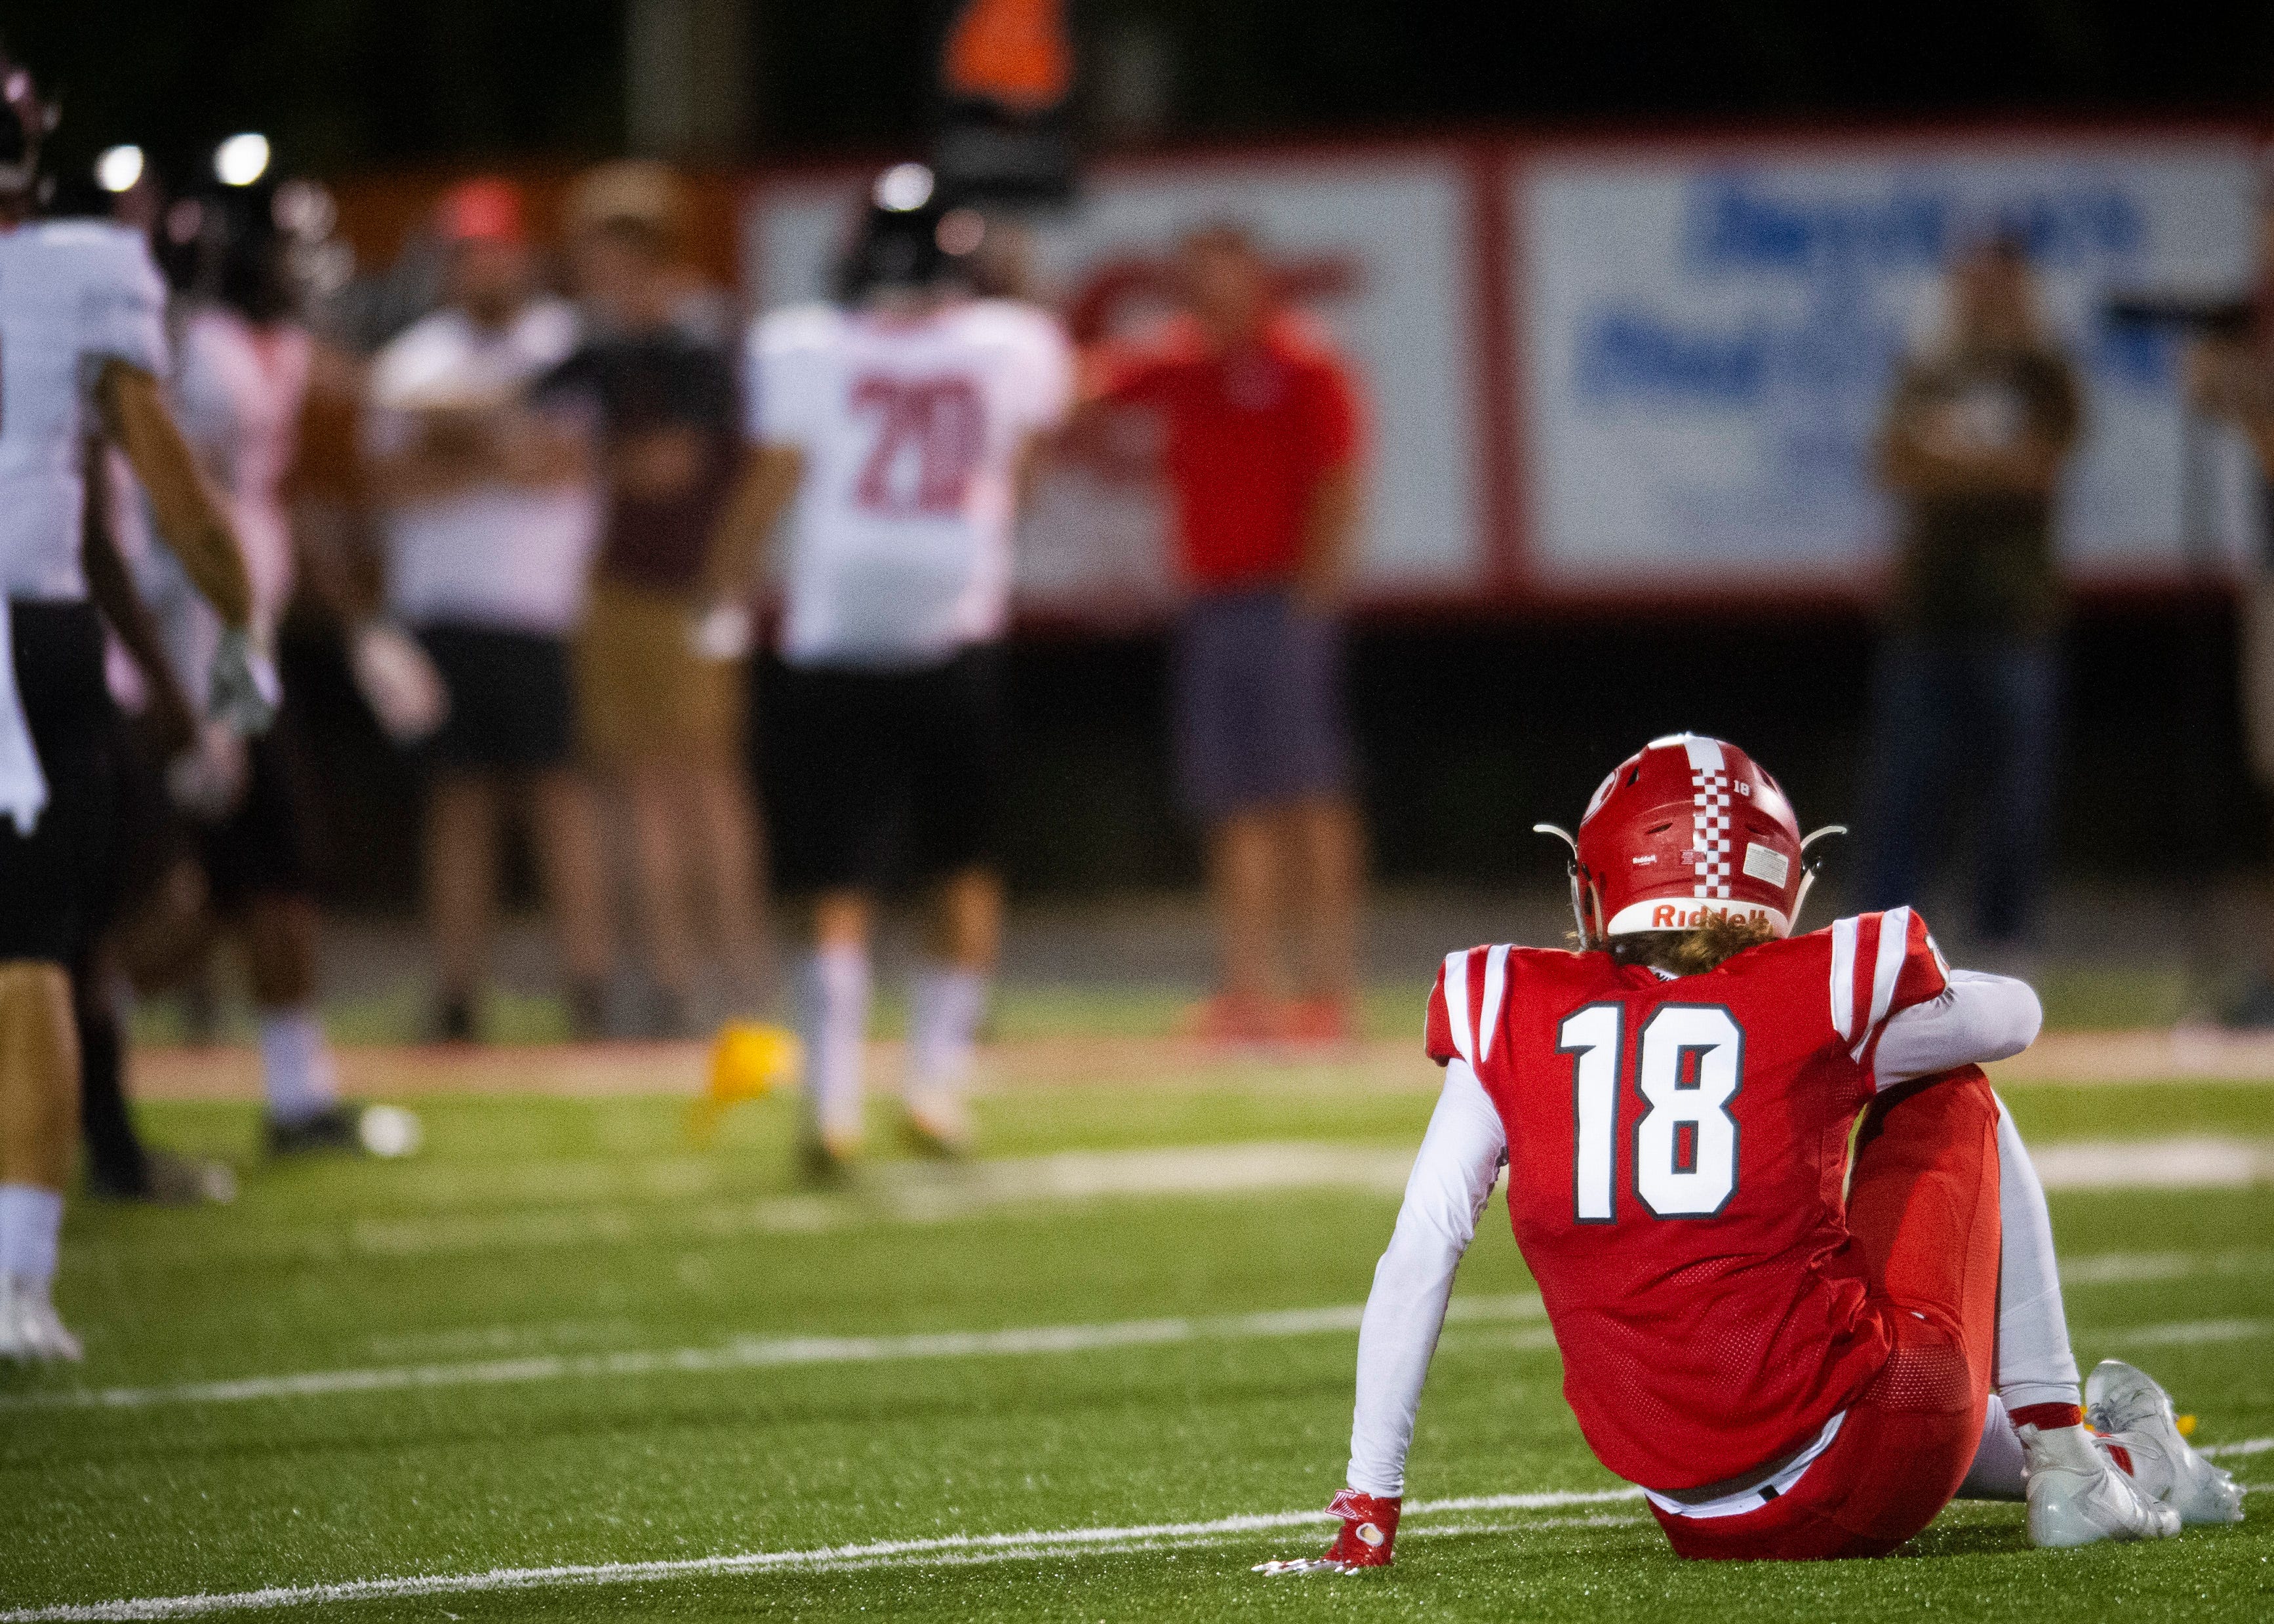 Halls' Jayden White (18) after a play during the Halls and Central high school football game on Friday, October 4, 2019 at Halls High School.